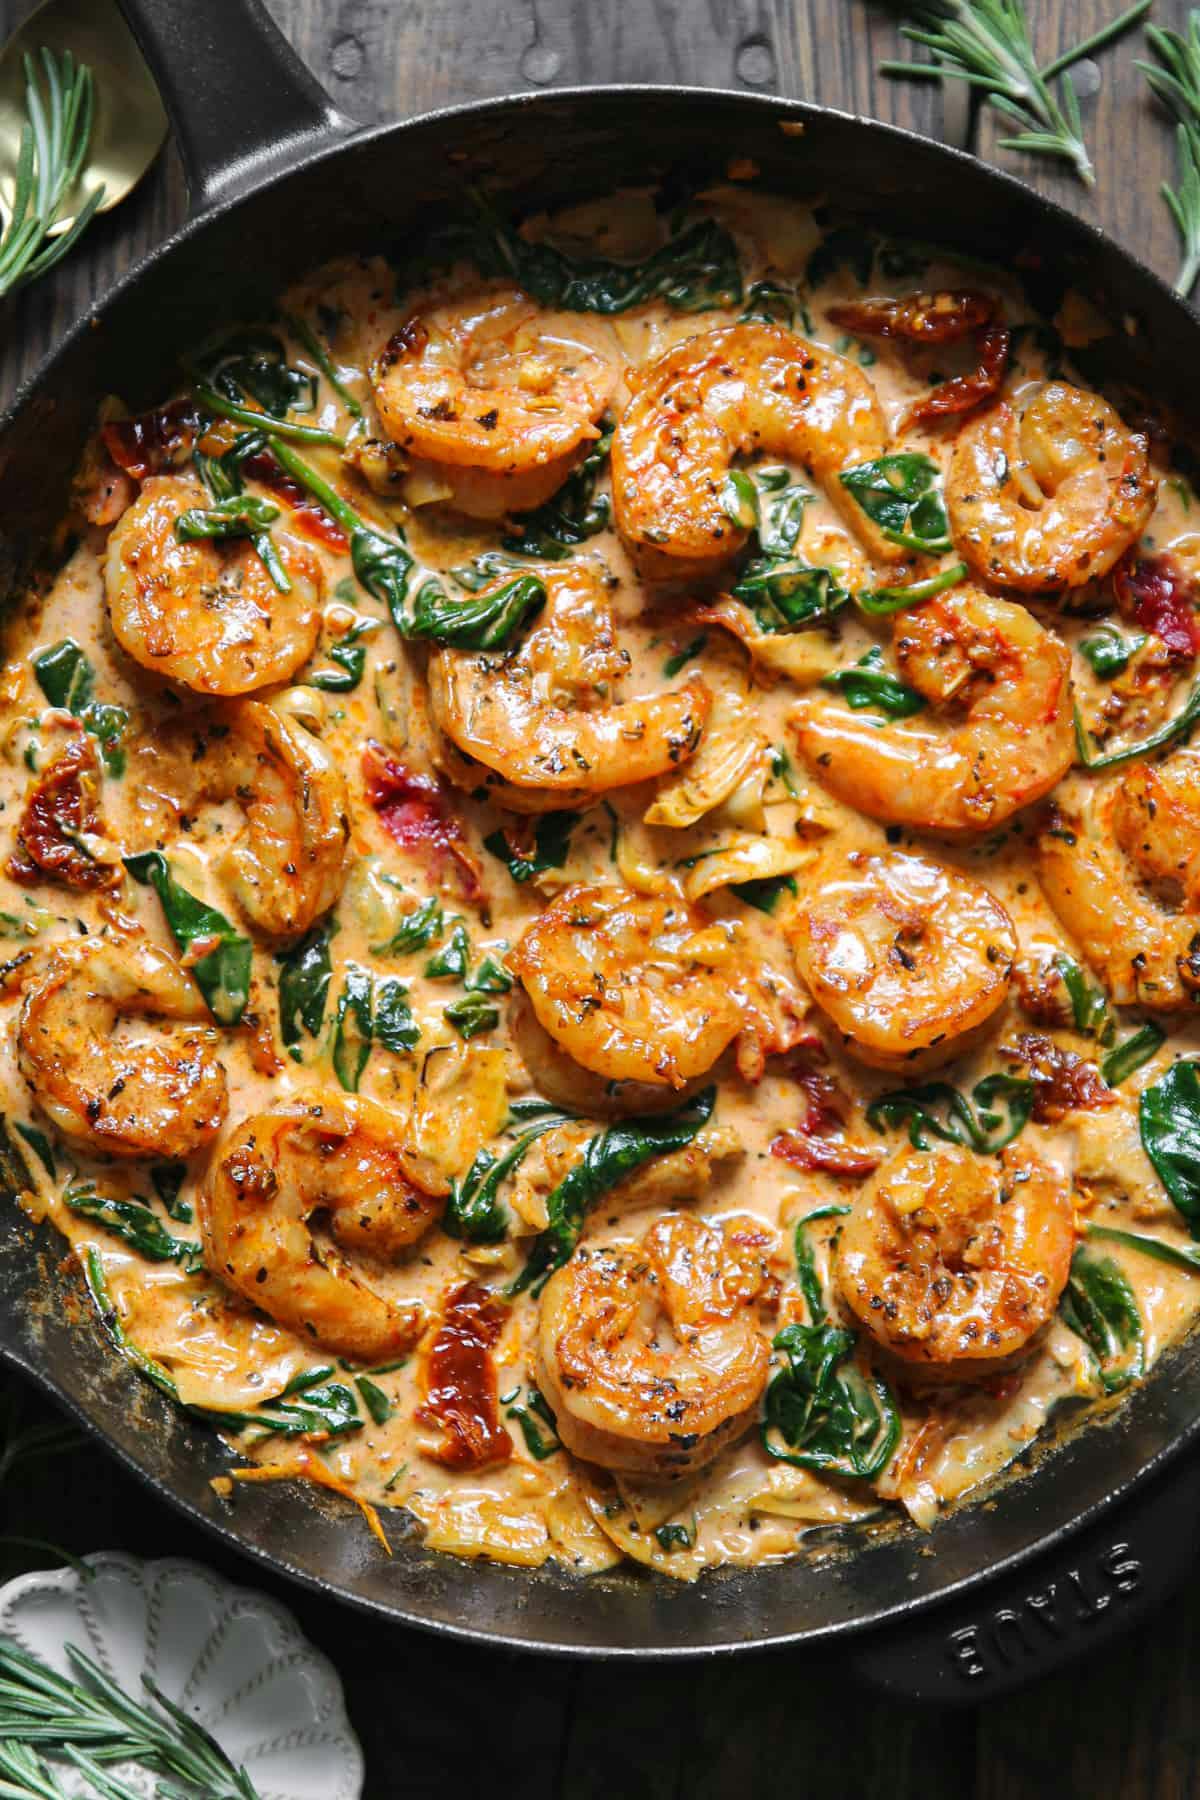 Tuscan Shrimp with Spinach, Artichokes, and Sun-Dried Tomatoes